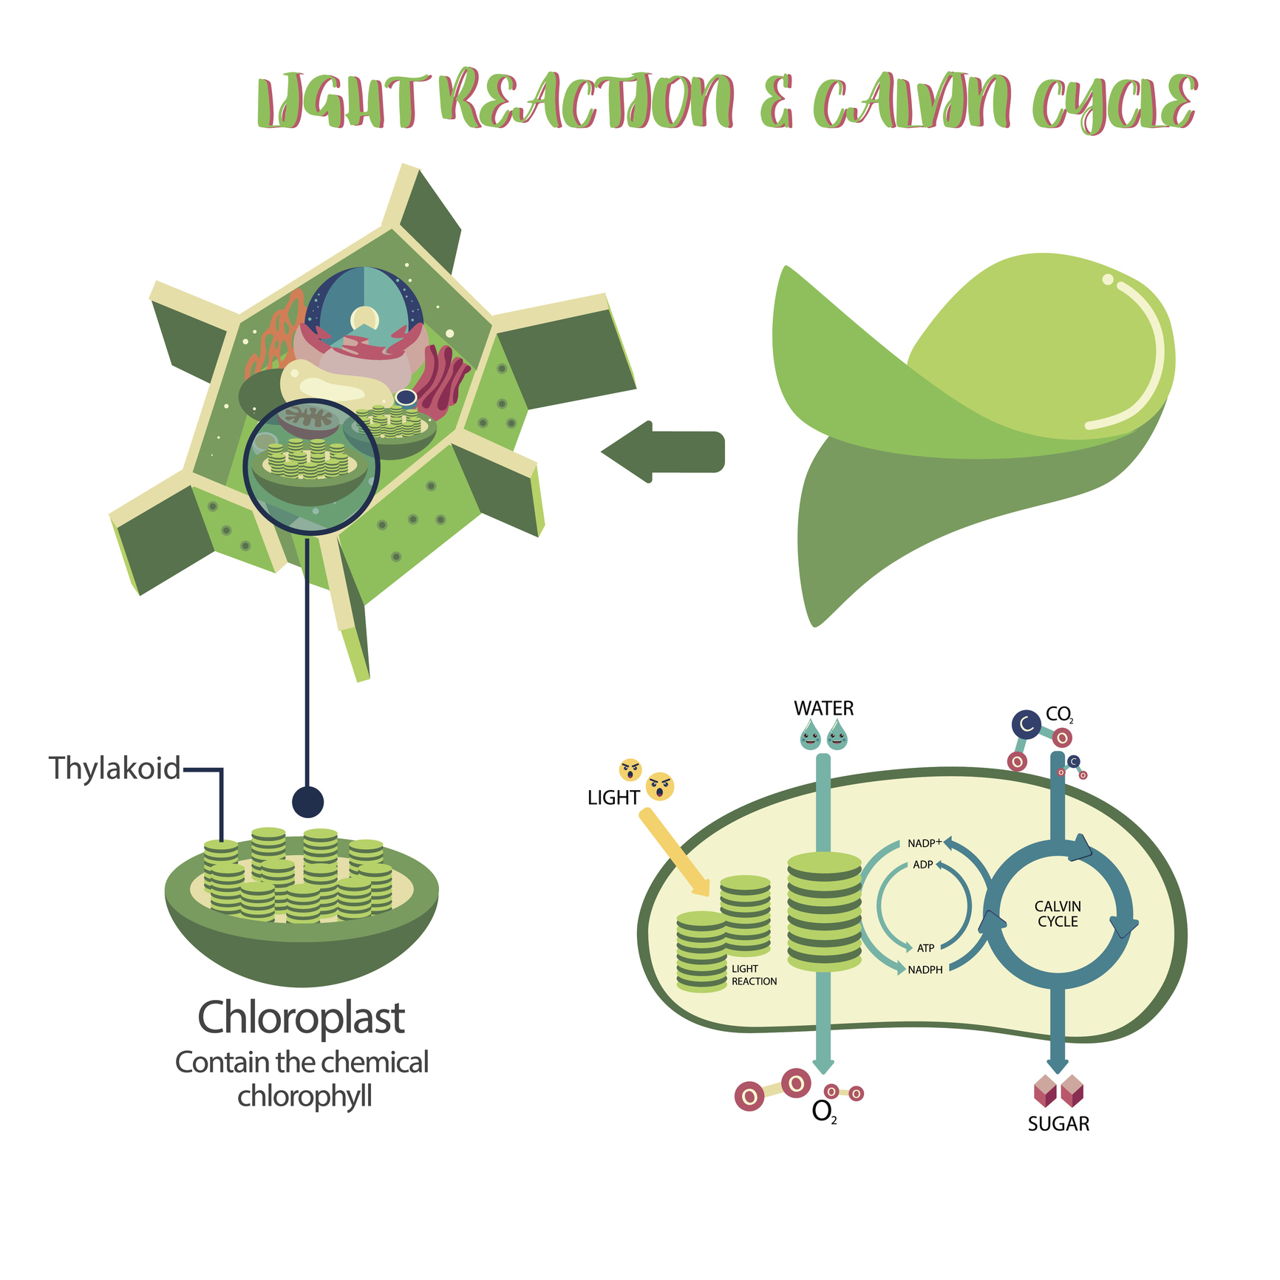 Cellular Respiration Is The Process That Continues After Photosynthesis In Plants And Takes Place In The Mitoc Cellular Respiration Photosynthesis Mitochondria